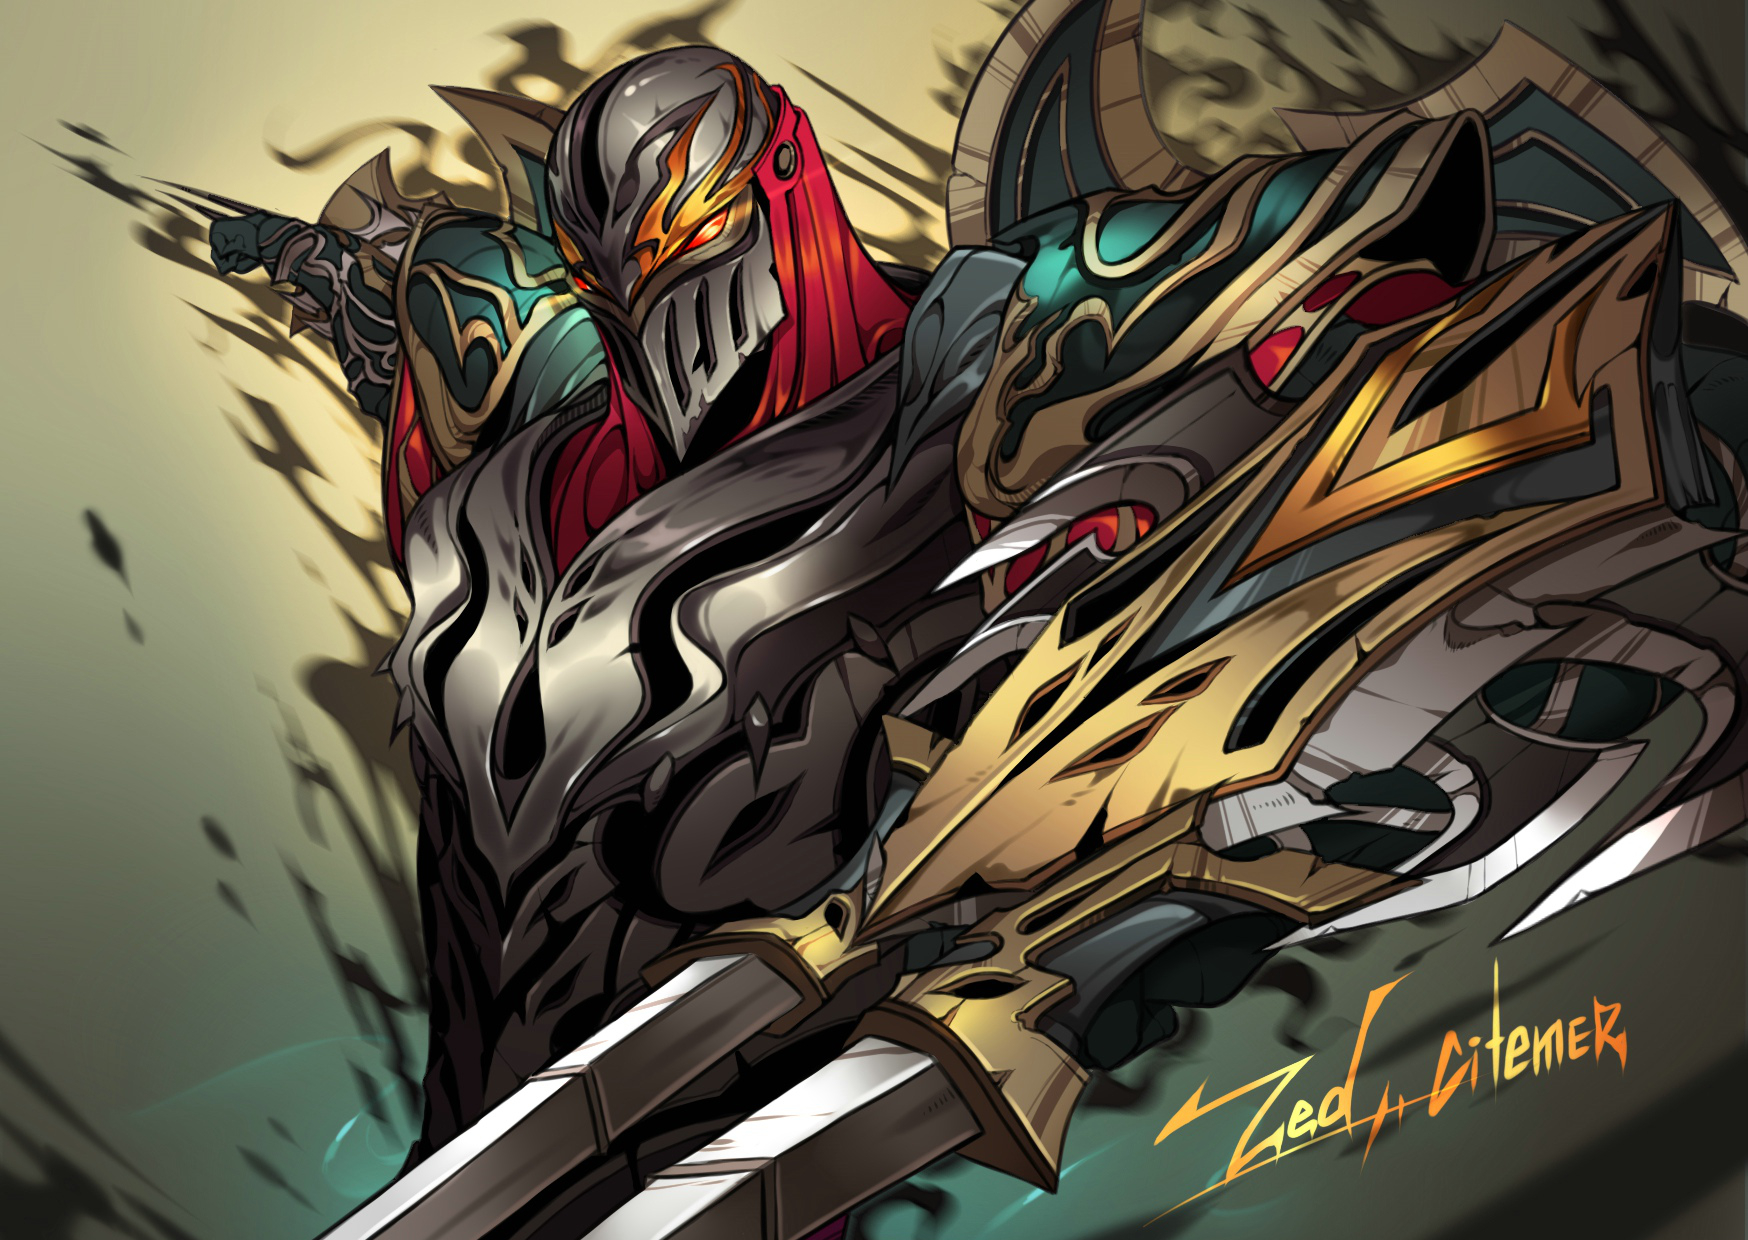 100+ Zed (League Of Legends) HD Wallpapers and Backgrounds